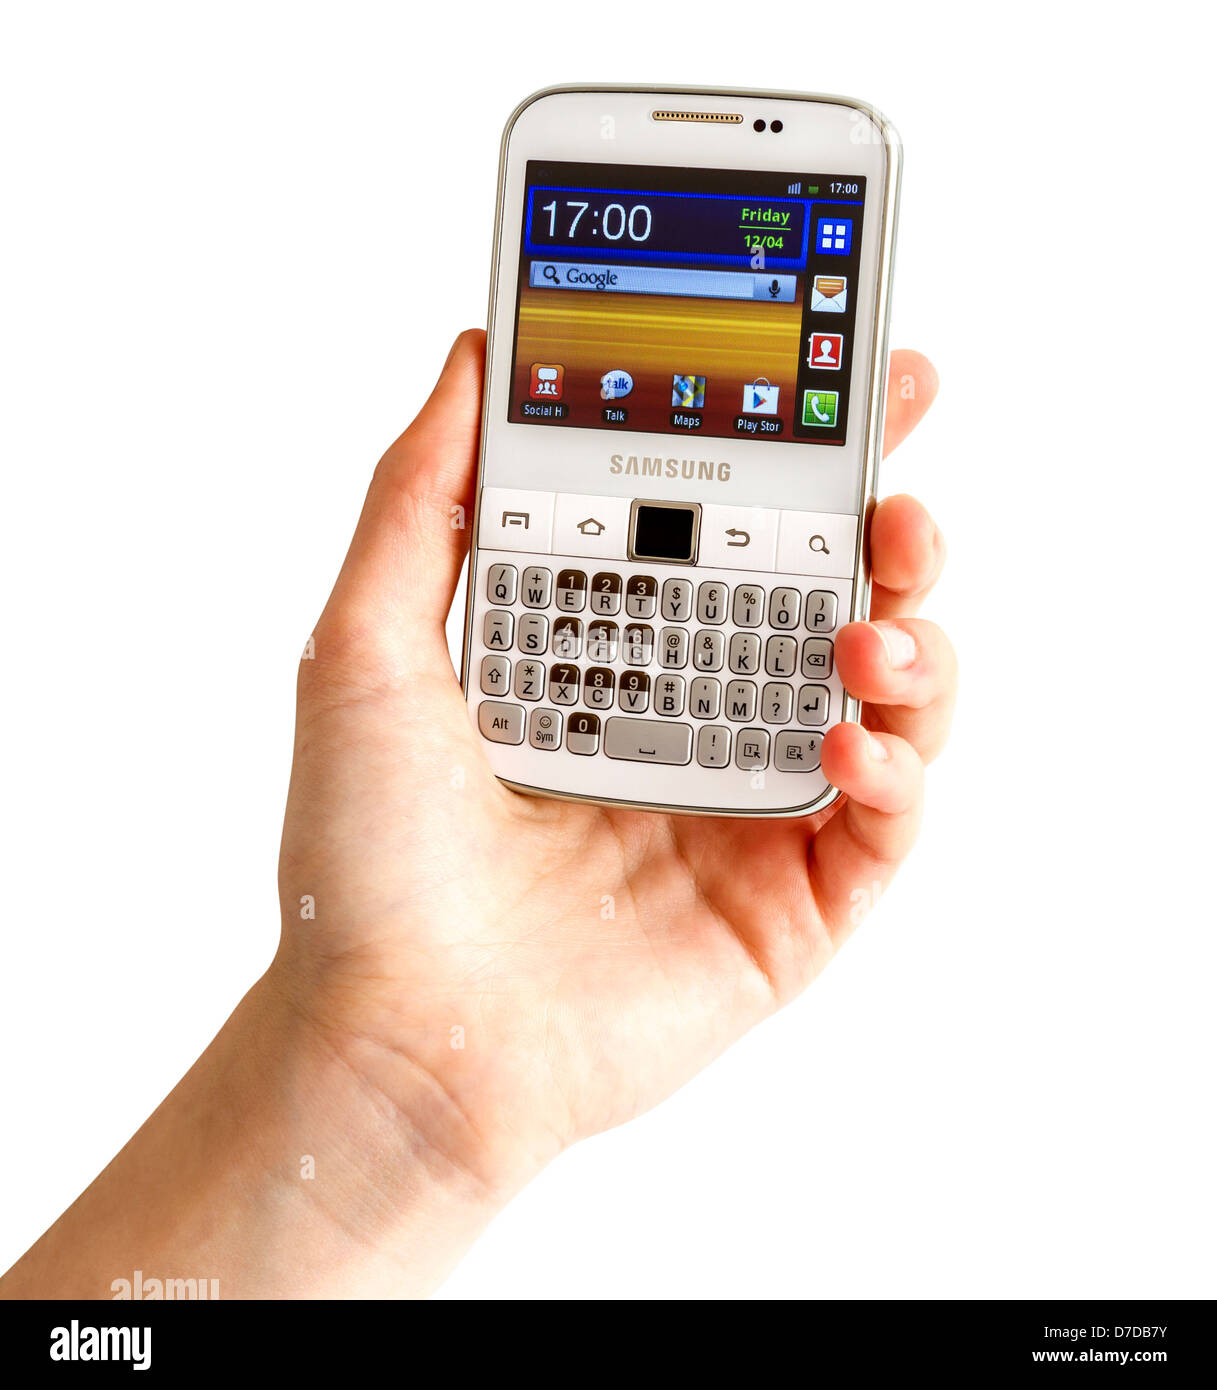 Samsung Galaxy Y Pro B5510 is a Android smartphone with full QWERTY keyboard candybar. Stock Photo